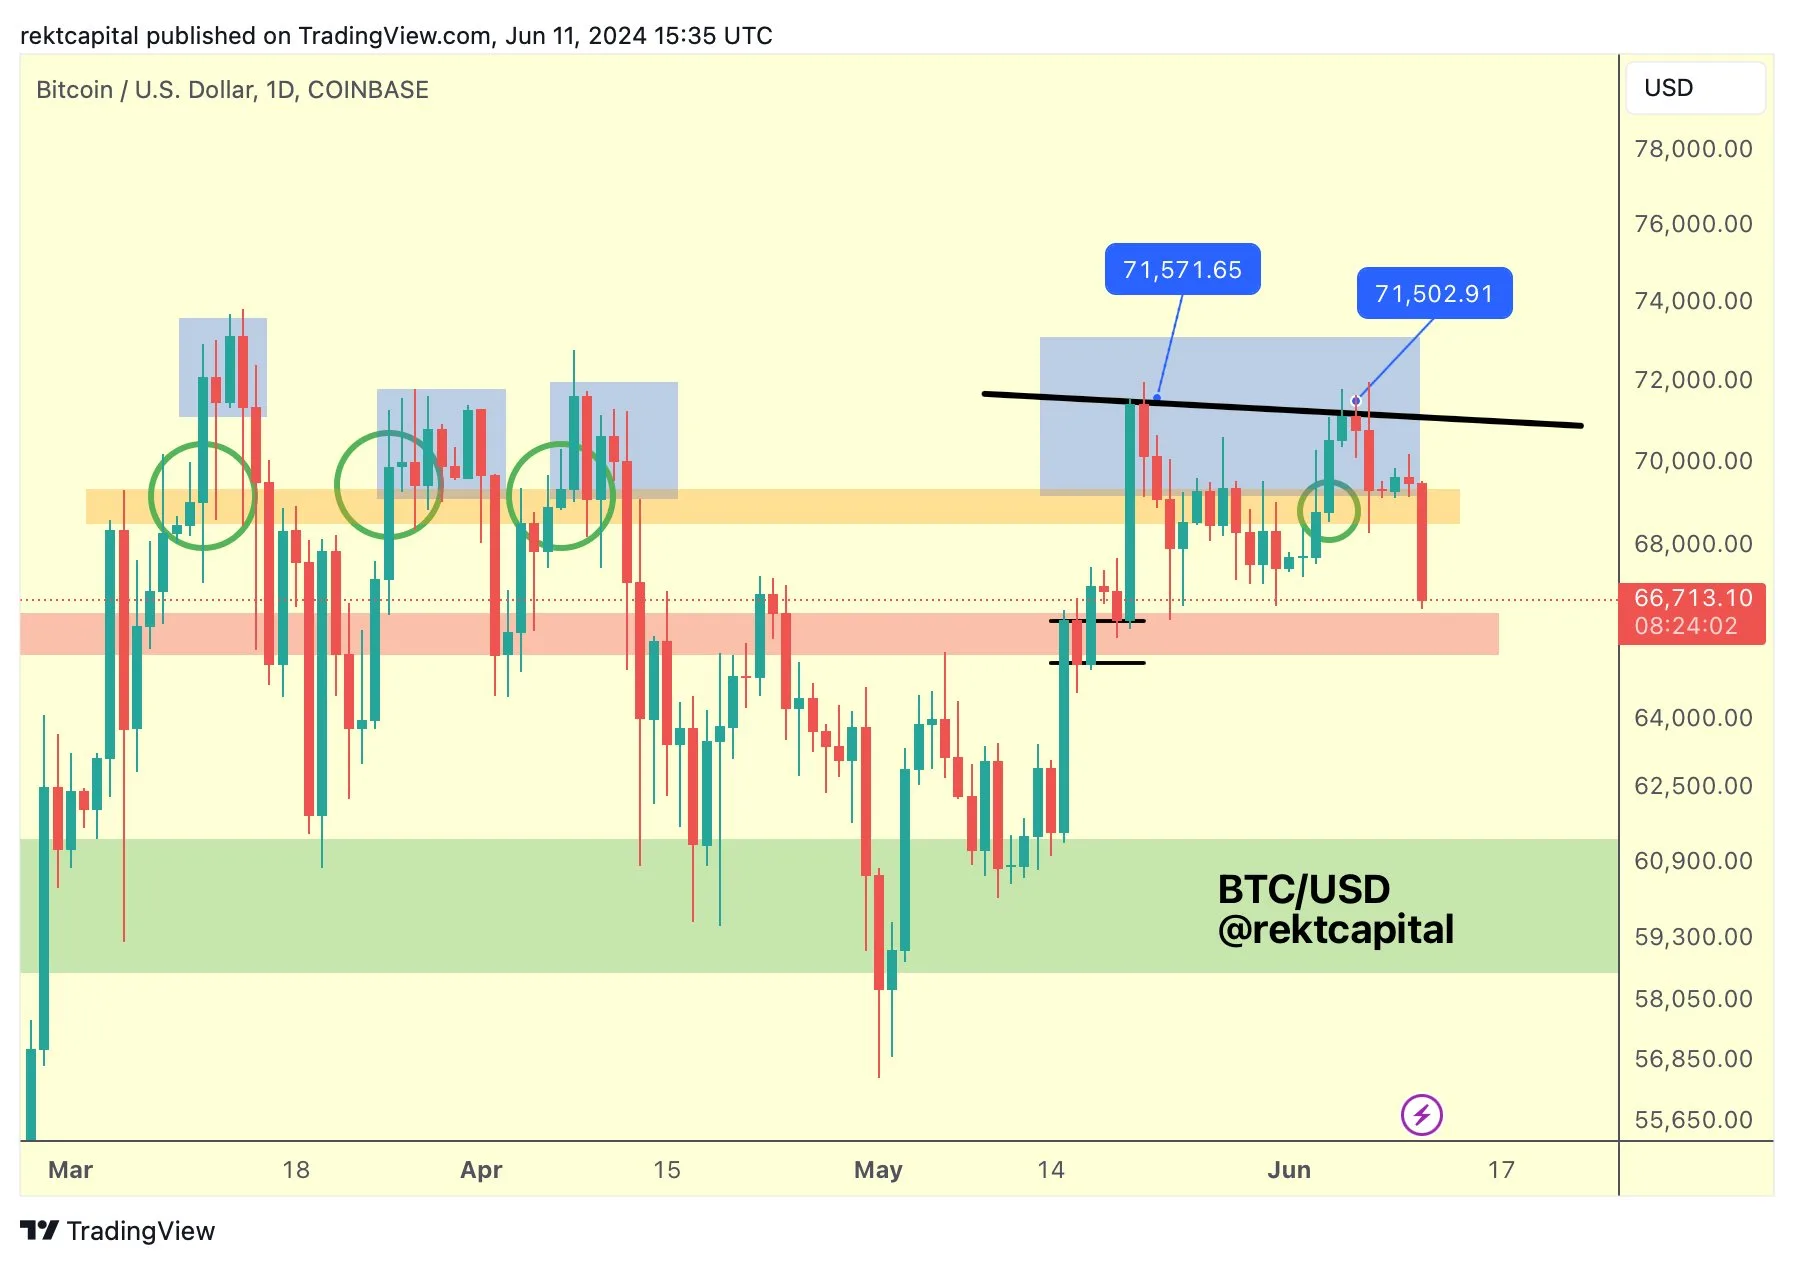 Crypto Trader Issues Bitcoin Warning, Says BTC Forming Topping Structure – Here’s His Outlook